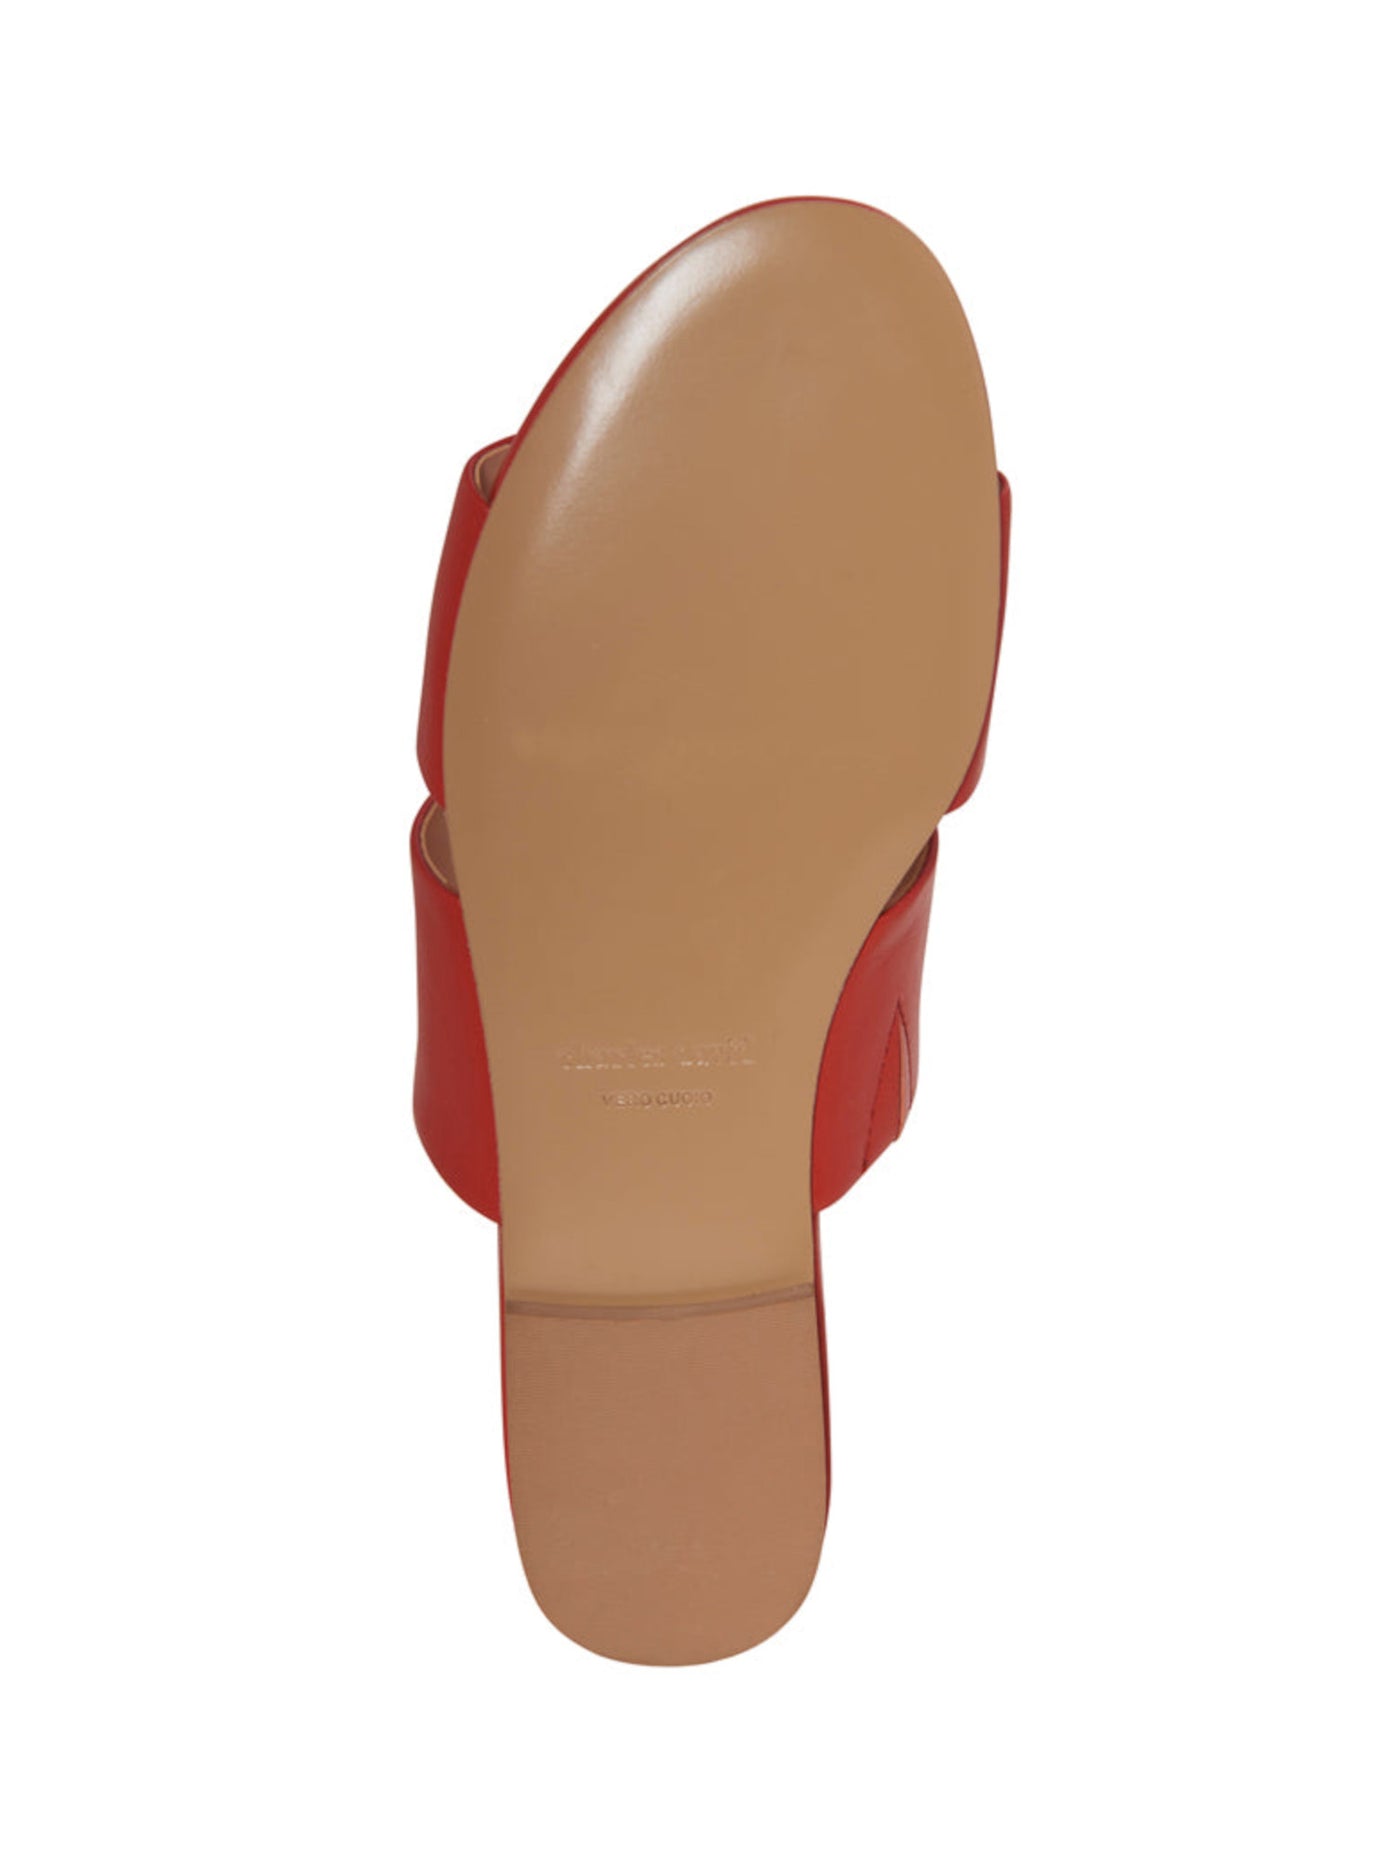 CHARLES BY CHARLES DAVID Womens Coral Orange Padded Siamese Round Toe Slip On Leather Sandals Shoes M